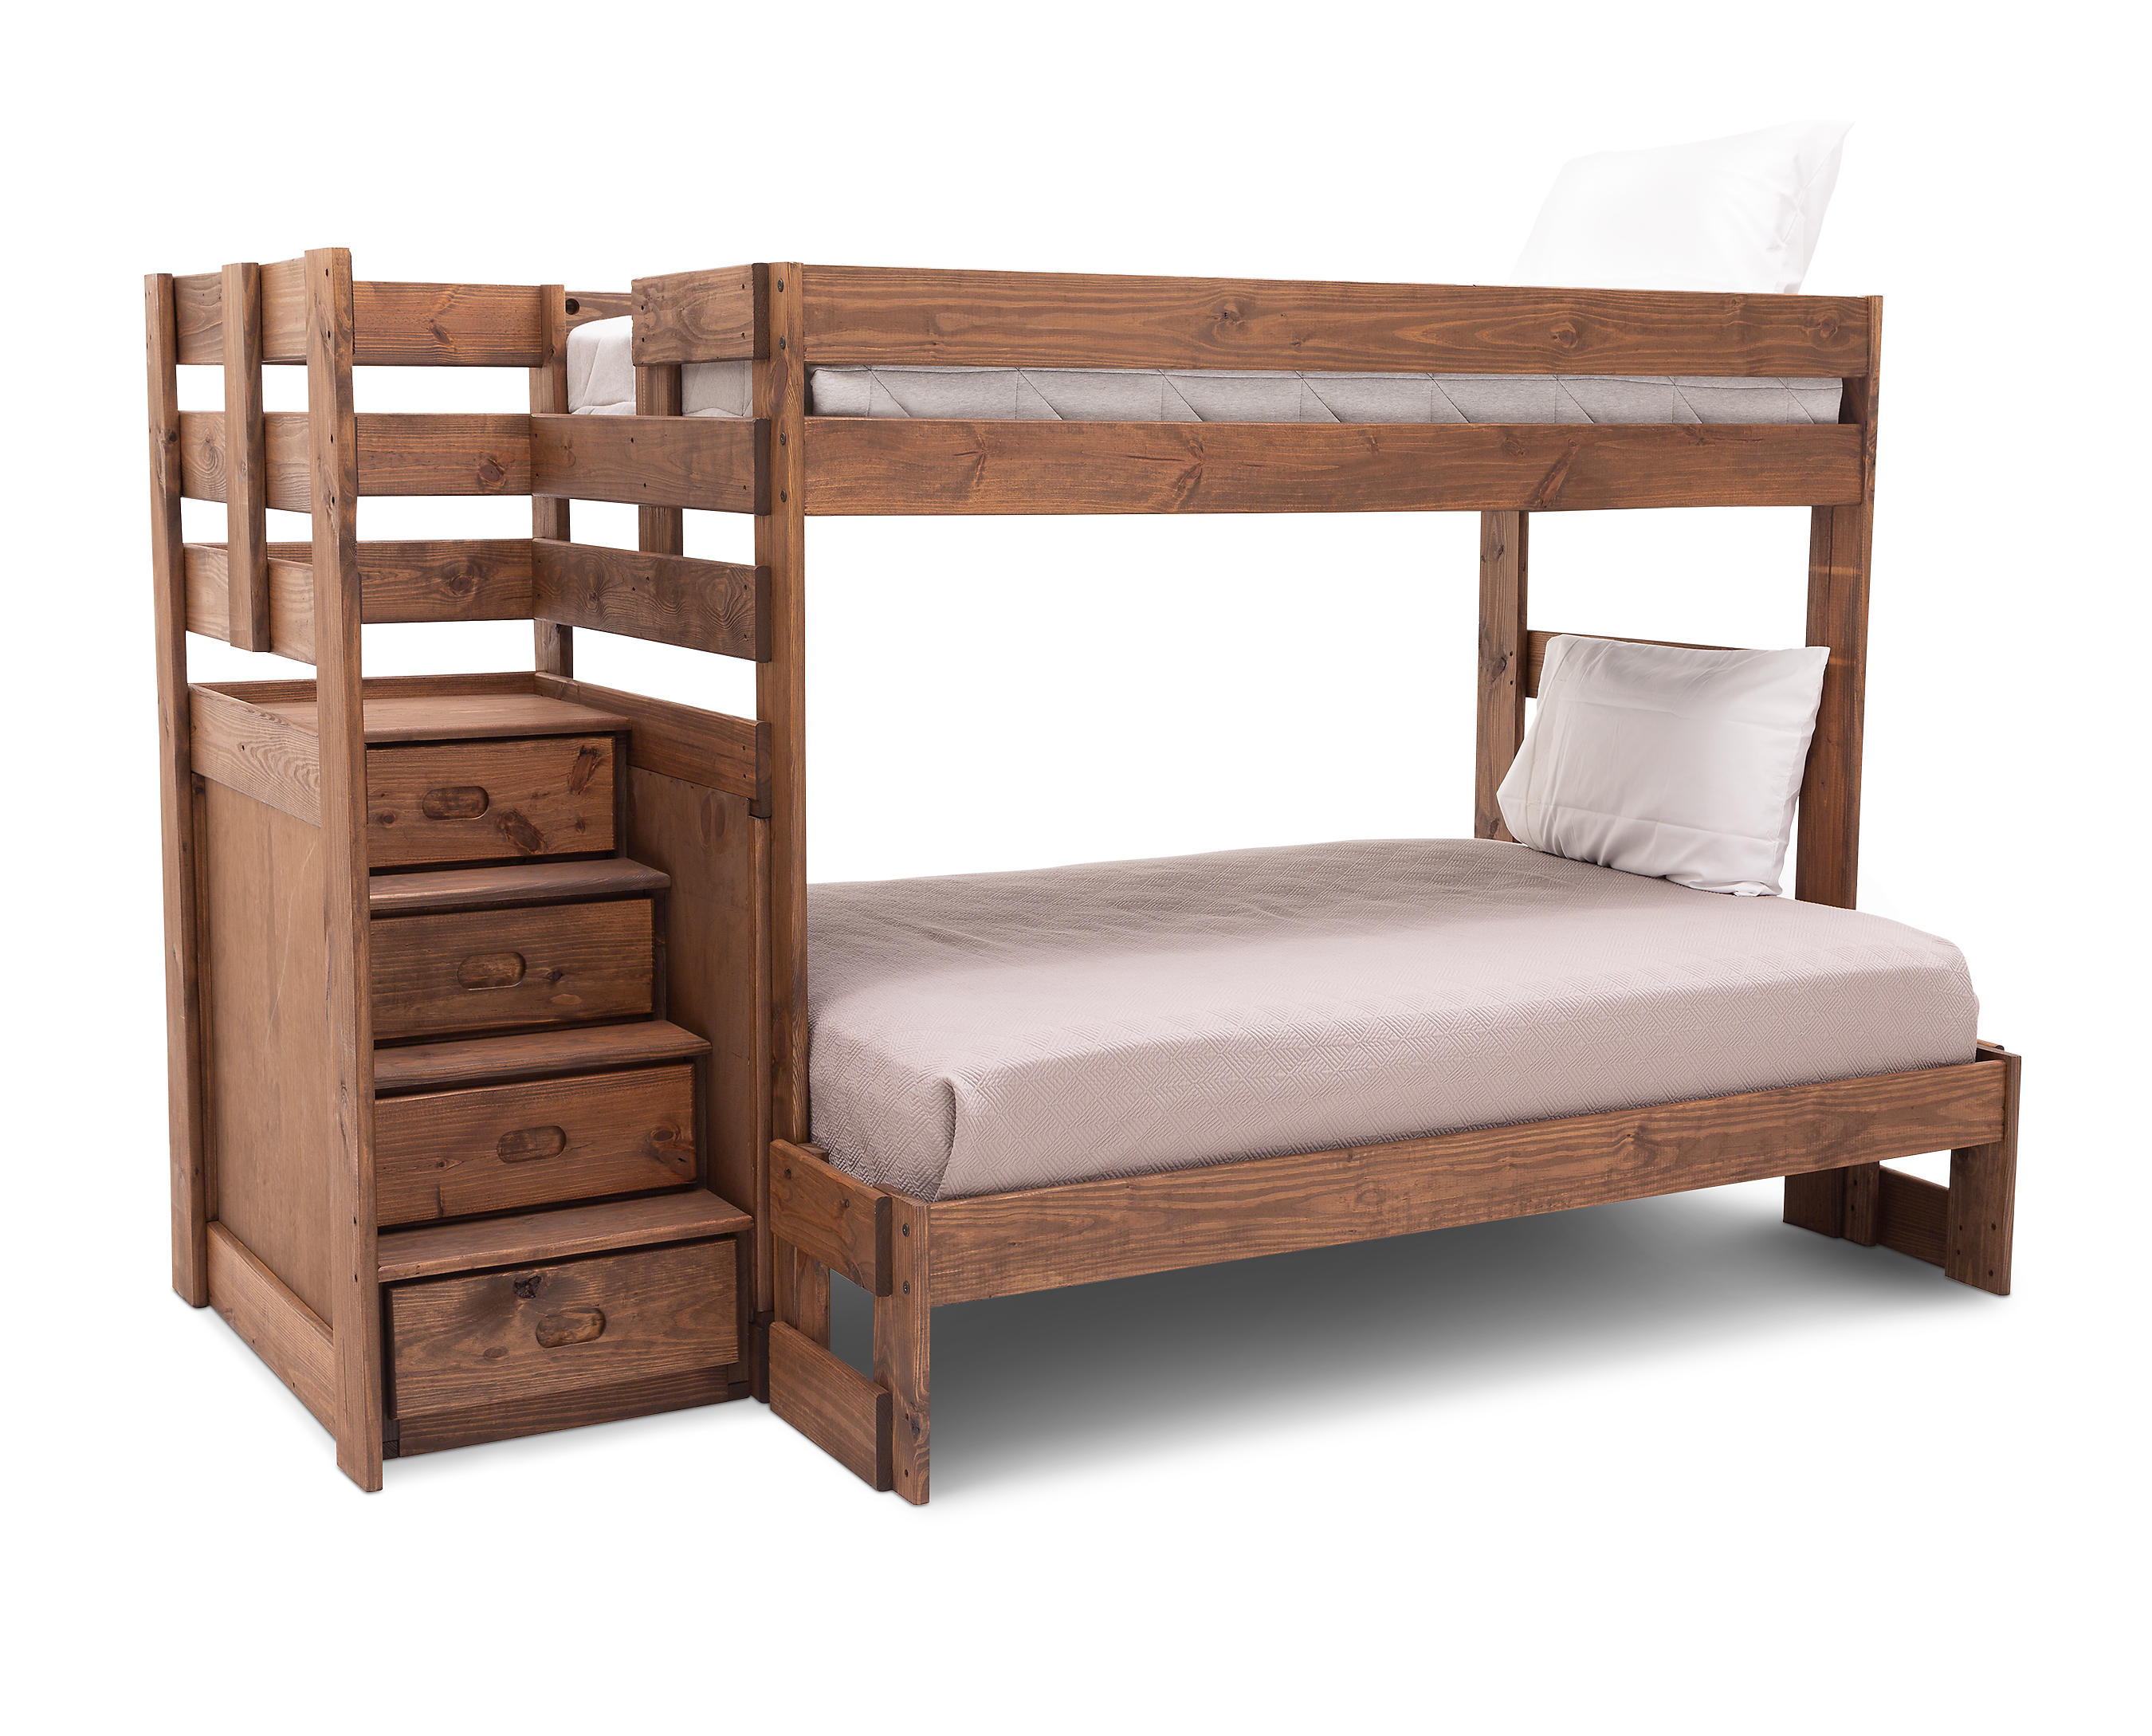 Moab Twin Full Stairbed Furniture Row, Furniture Row Bunk Beds